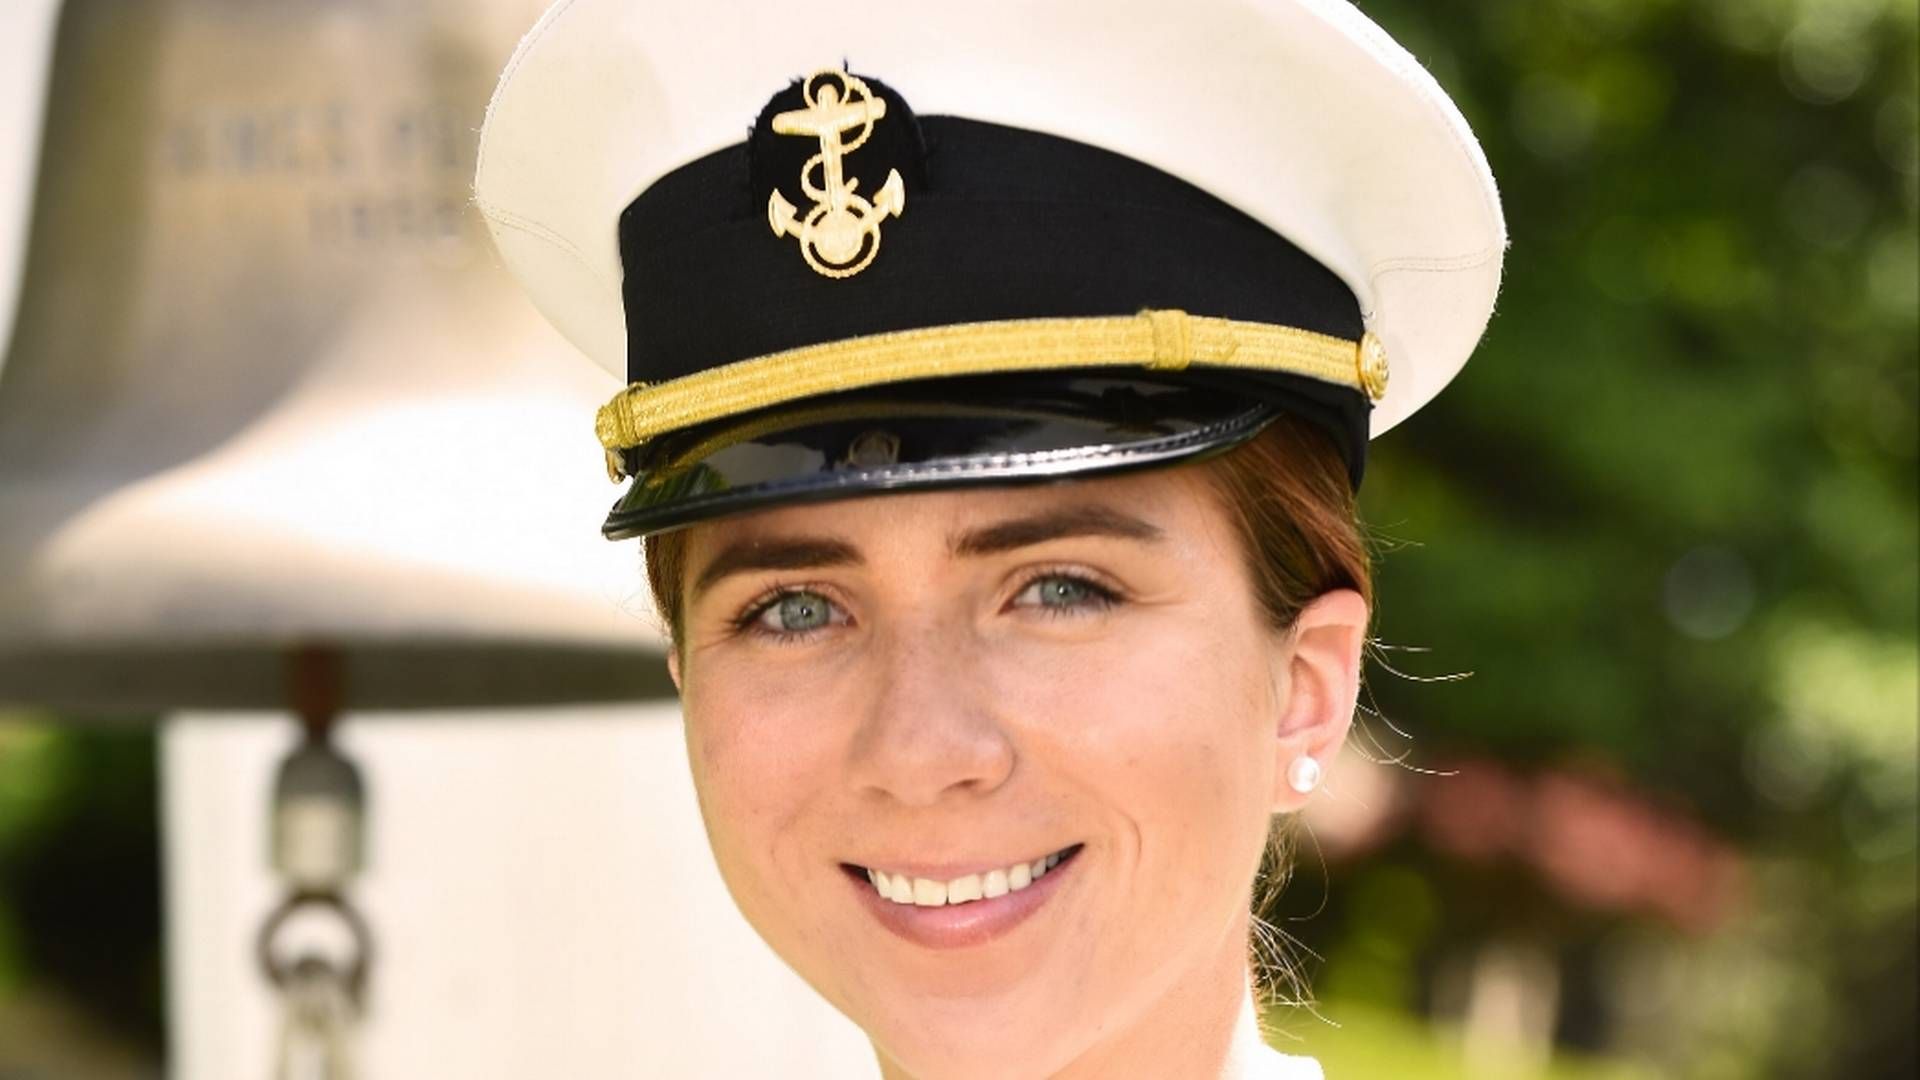 Hope Hicks was assaulted four years ago on the Maersk ship Alliance Fairfax while undergoing naval cadet training on the ship, and later shared her story in a blog post. | Photo: Maritime Legal Solutions